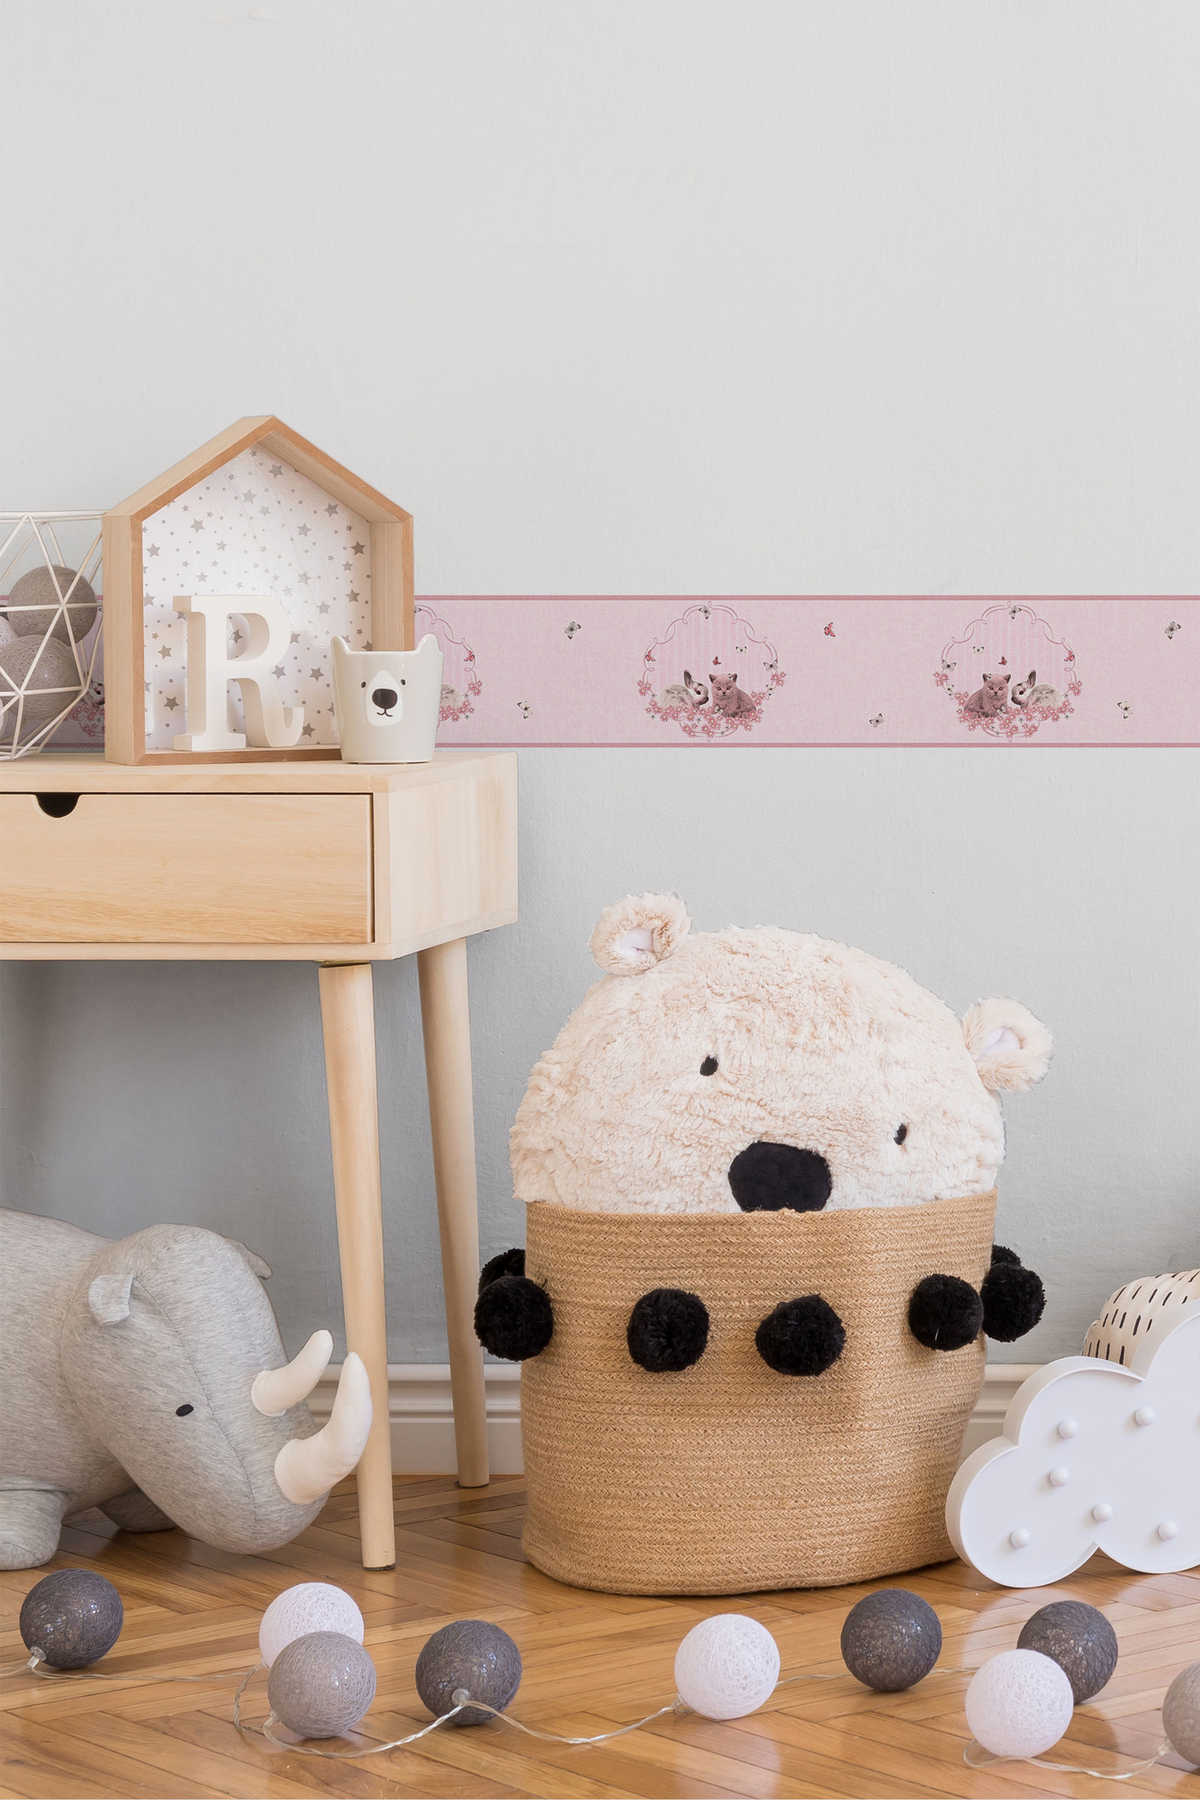             Kids Room Border Cat, Bunny & Butterfly - Pink
        